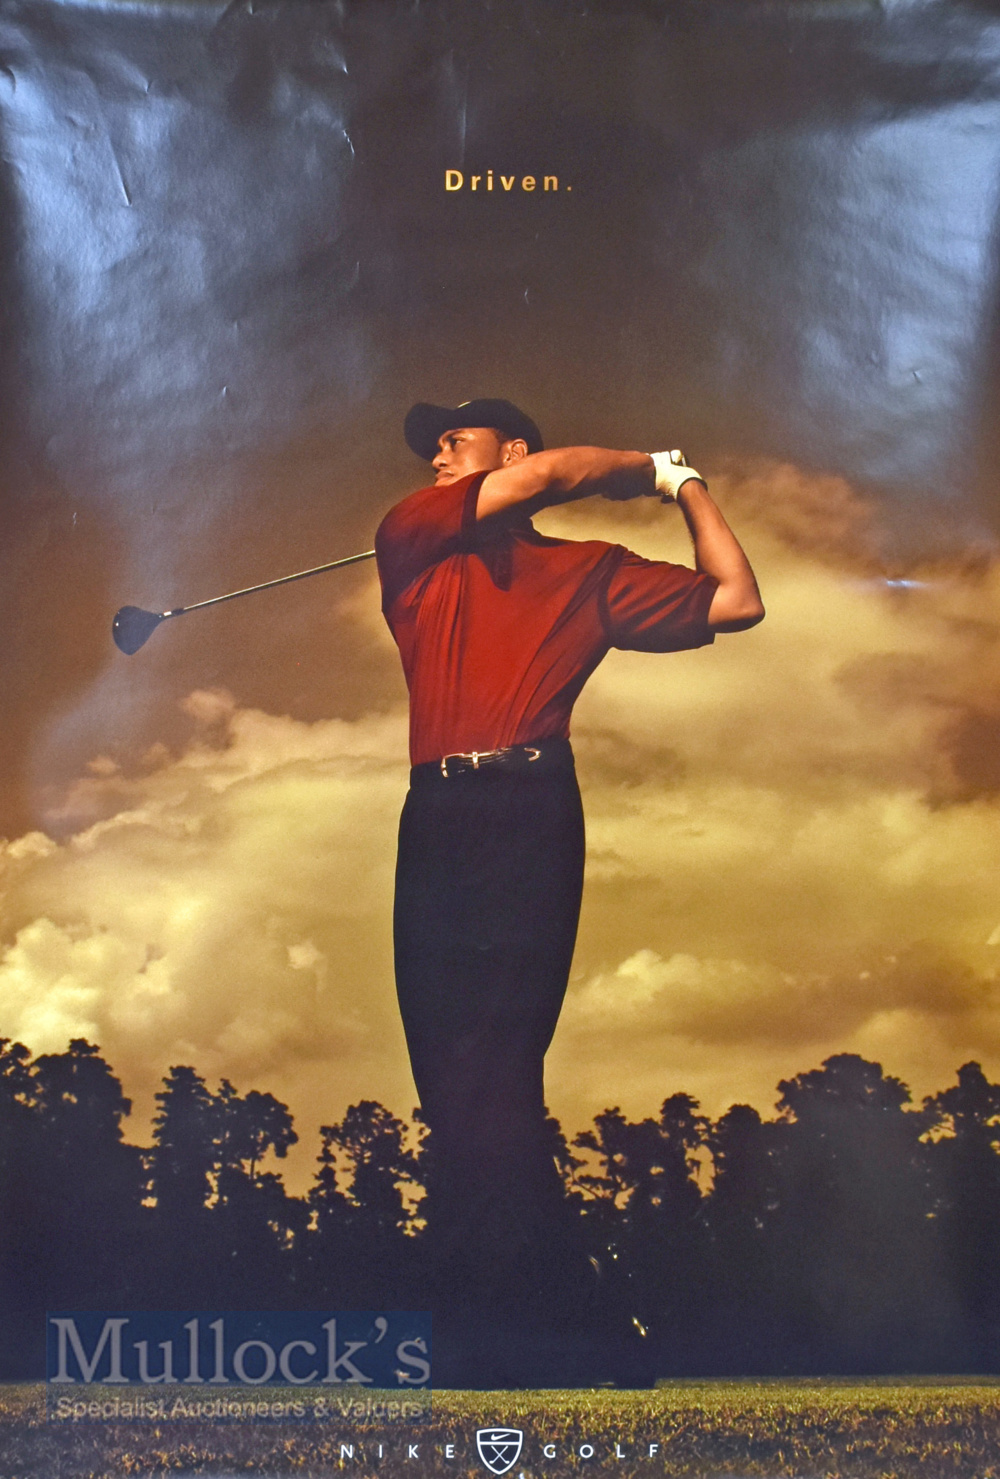 2x Tiger Woods Nike Golf original colour posters 1x entitled Driven with no other details, the other